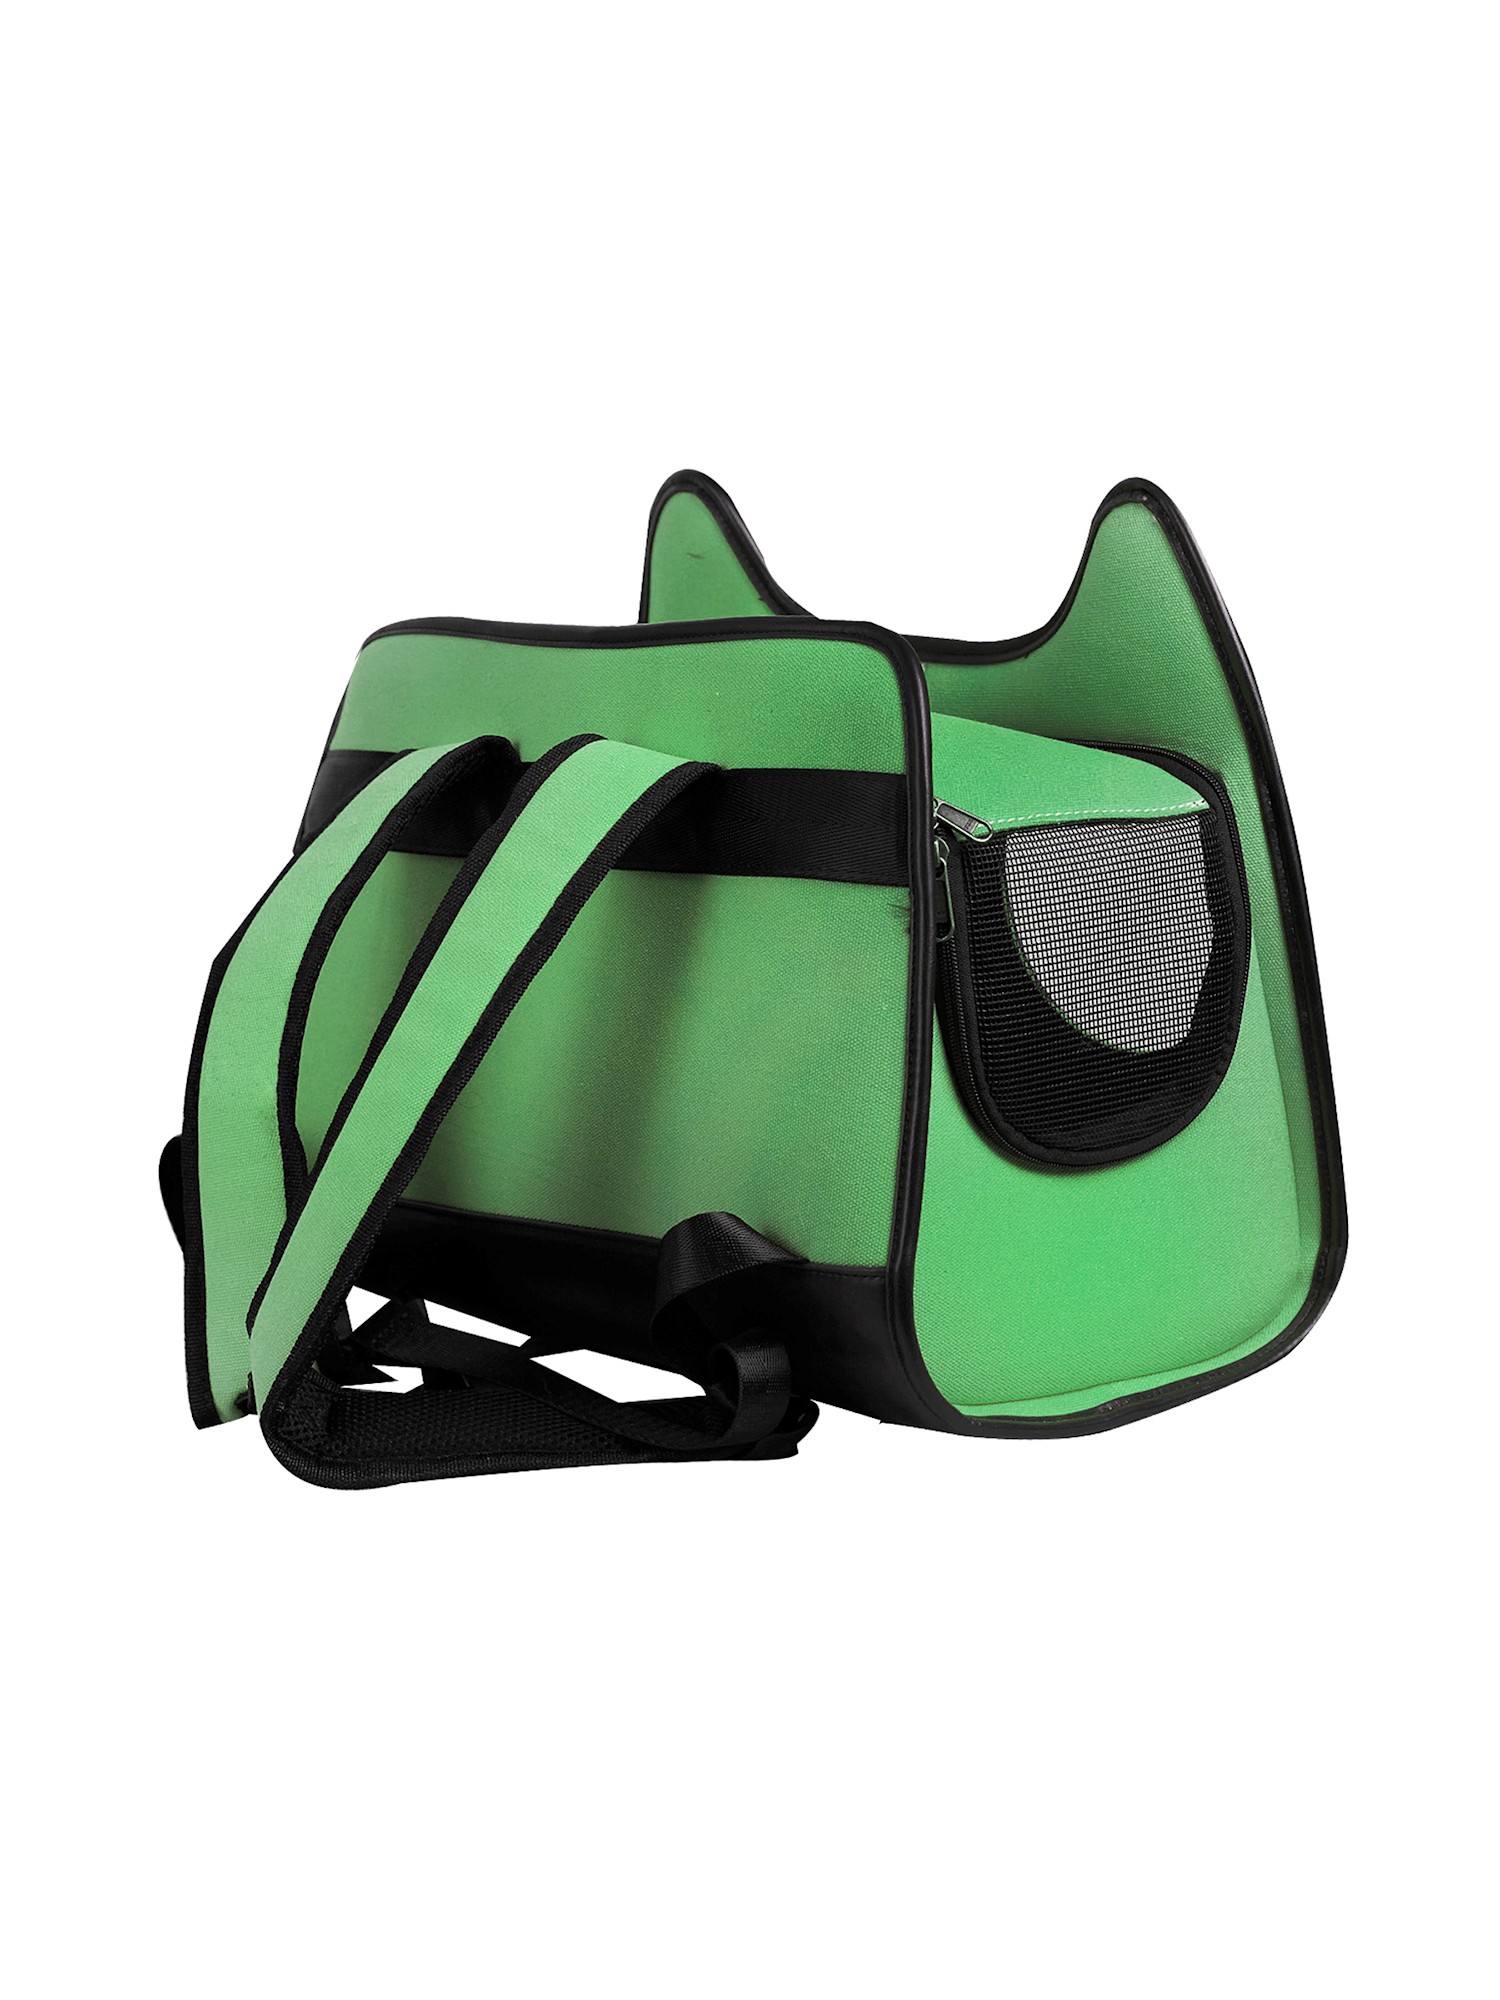 Primetime Petz KittyPak Collapsible Backpack Cat Carrier - image 2 of 7